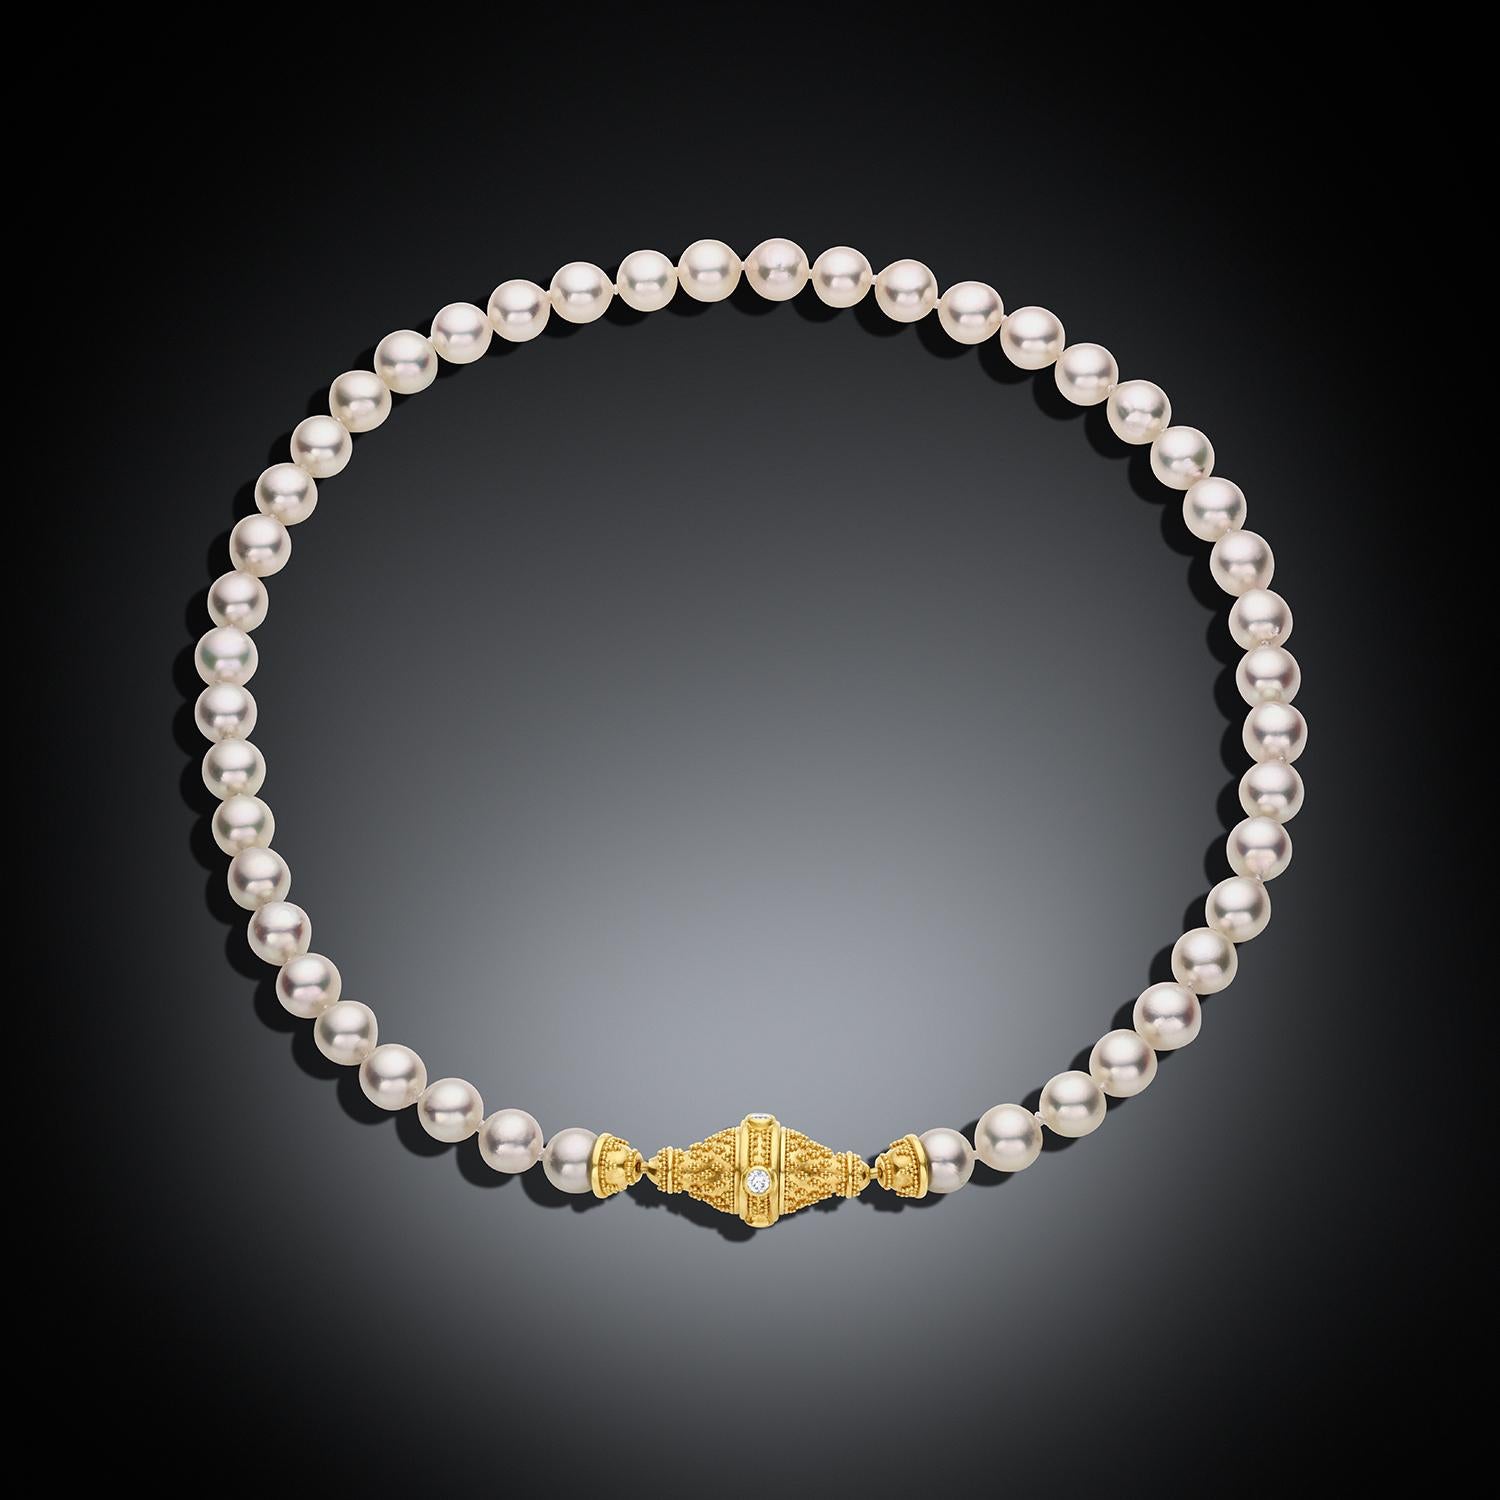 Kent Raible Akoya Pearl Necklace, 18 K Gold and Diamond clasp with Granulation For Sale 7